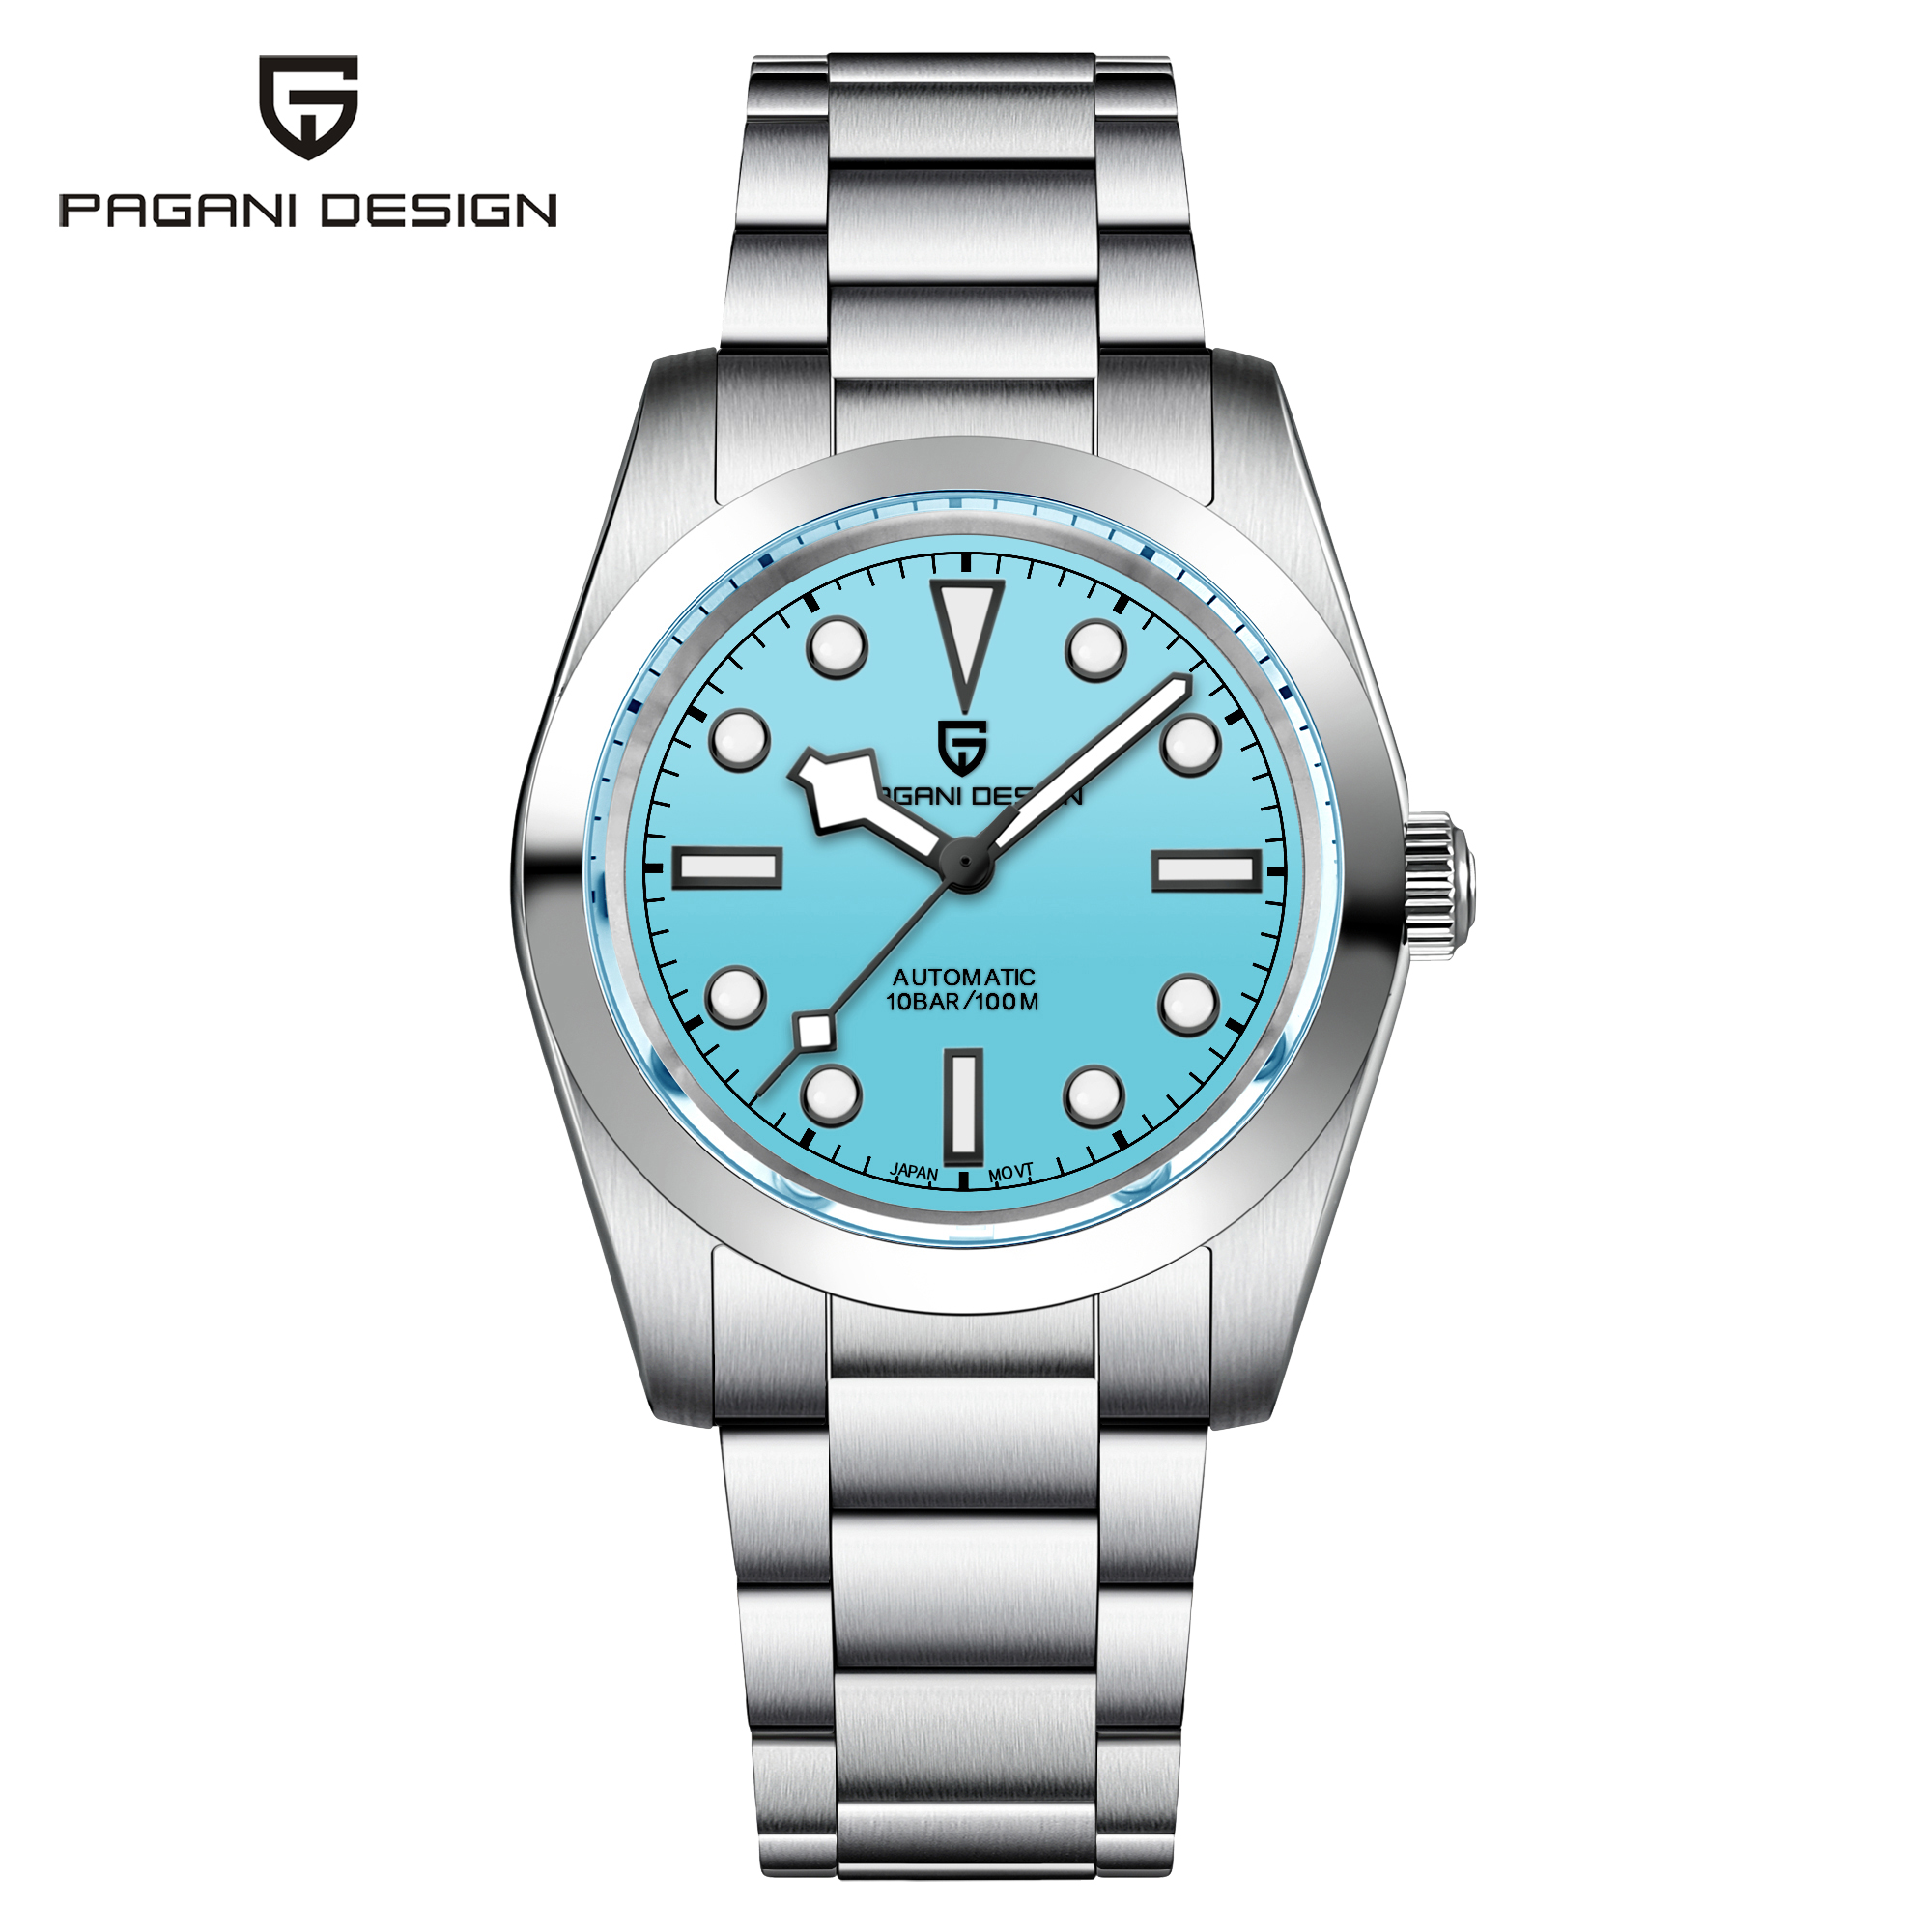 New PAGANI DESIGN 36MM Tiffany Blue Snowflake Pointer Mechanical Men Wristwatches Luxury Sapphire Glass NH35 Movement Automatic Watch for Men/Perfect Gift